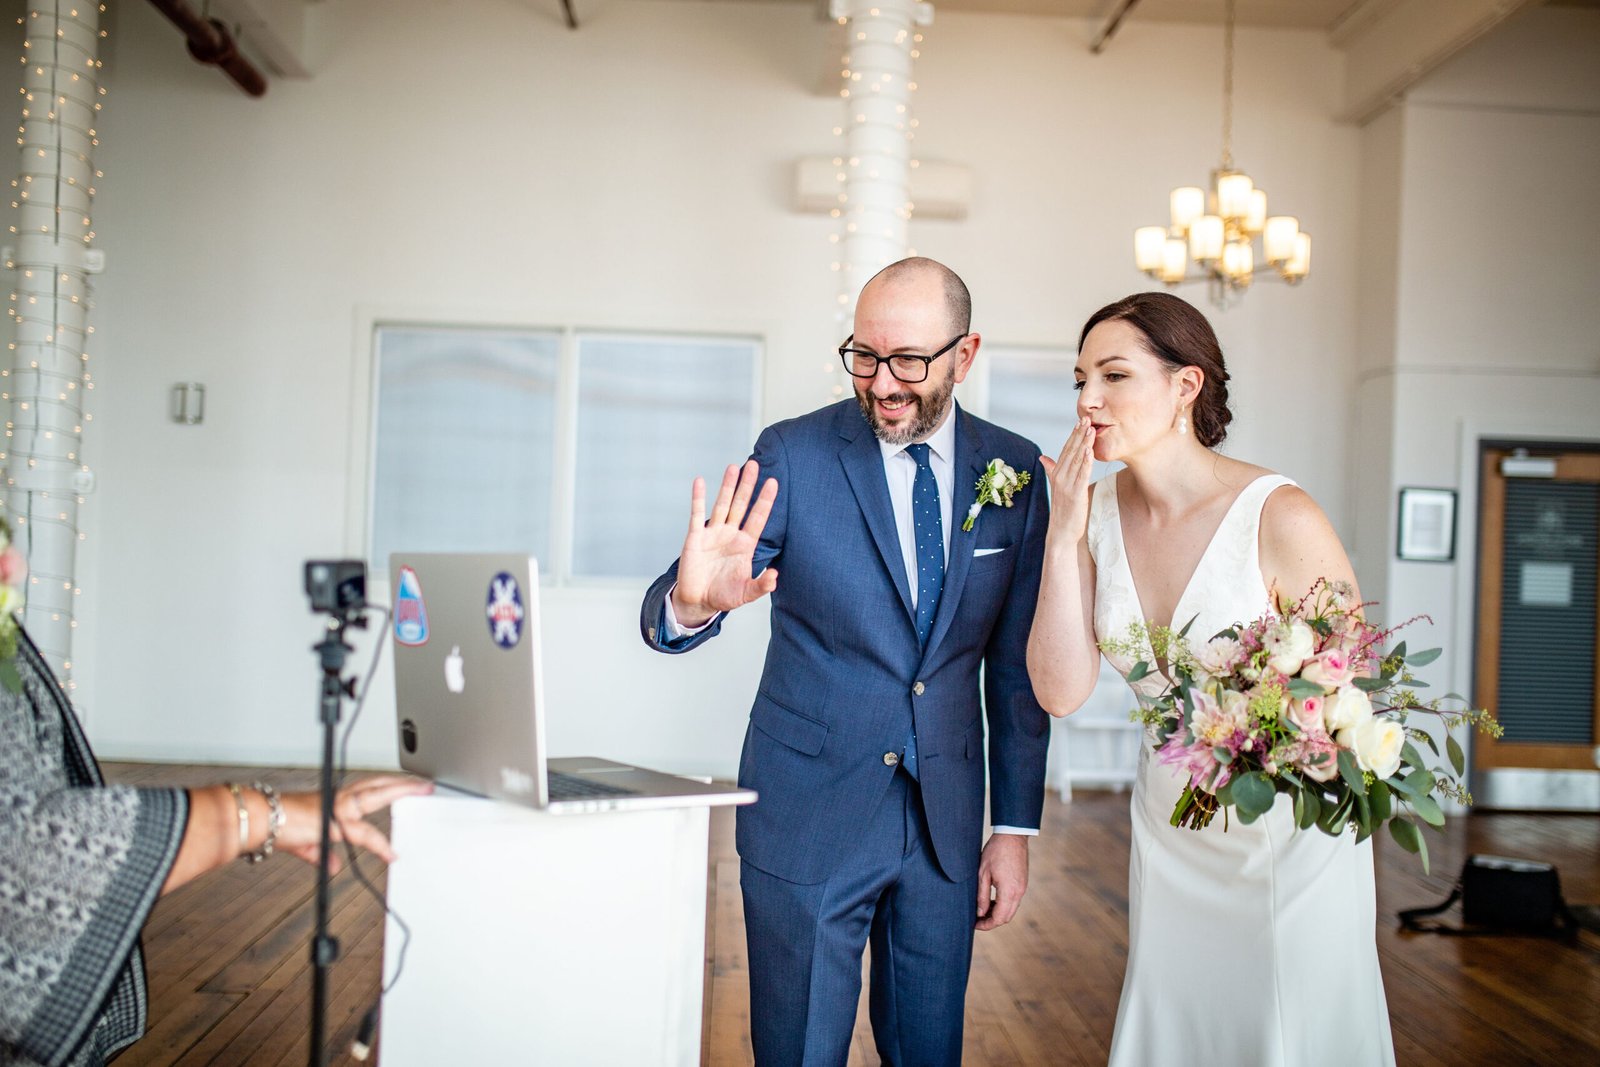 wedding couple looking at computer screen